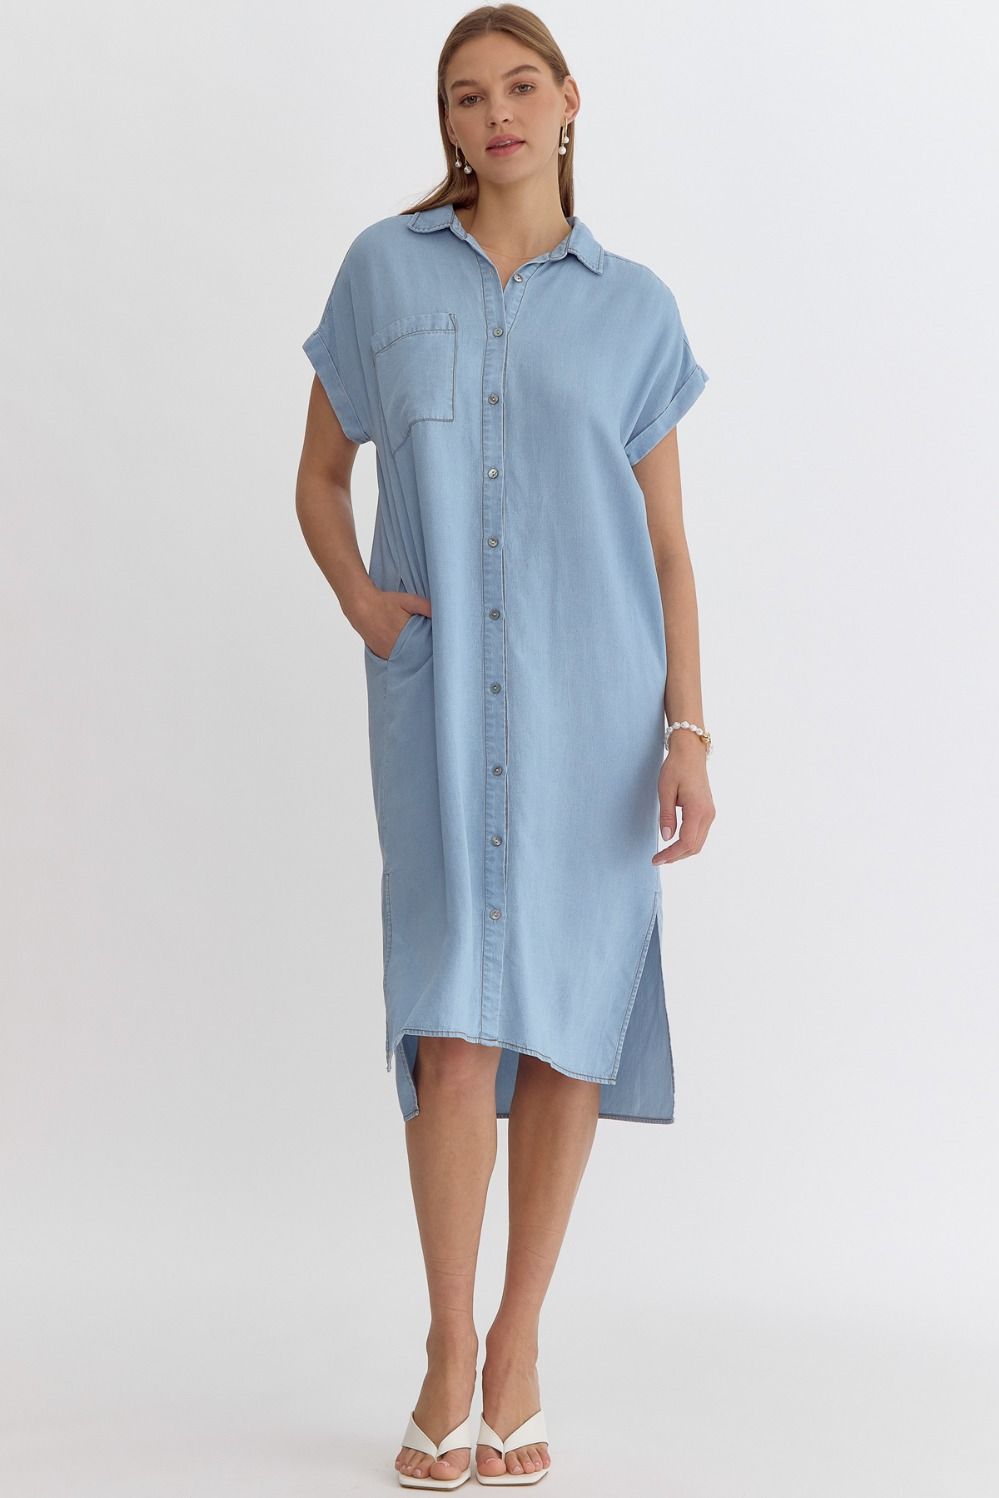 Stroll By The Shore Chambray Dress